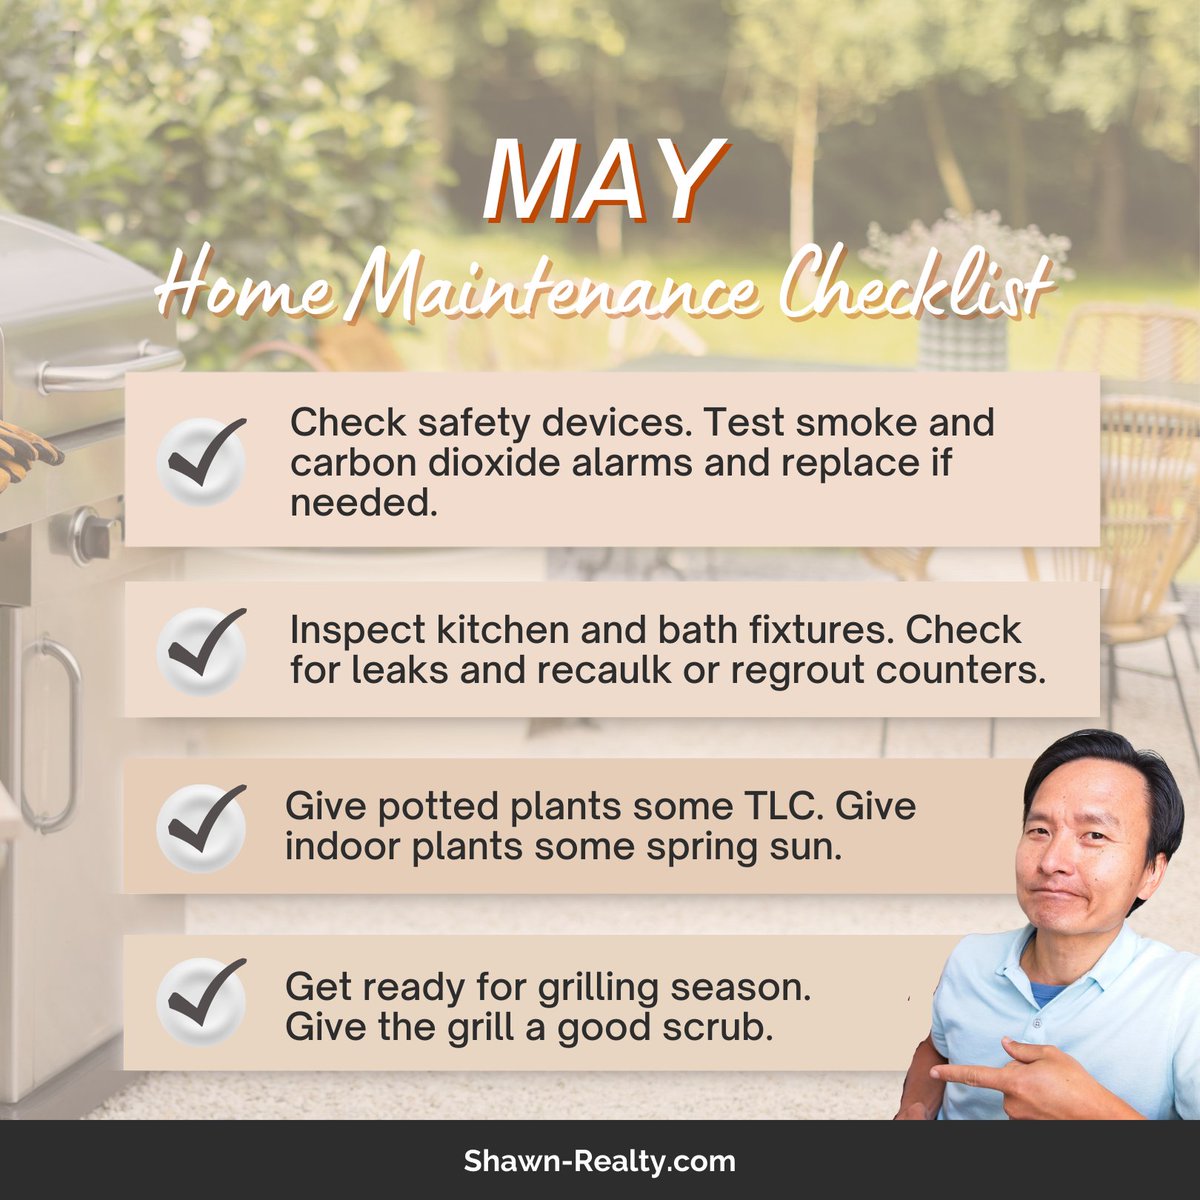 Come what May, your home will be ready with Shawn Realty's Home Maintenance Checklist for this month ✅

#shawnrealty #homemaintenance #grillingseason #realtor #realestate